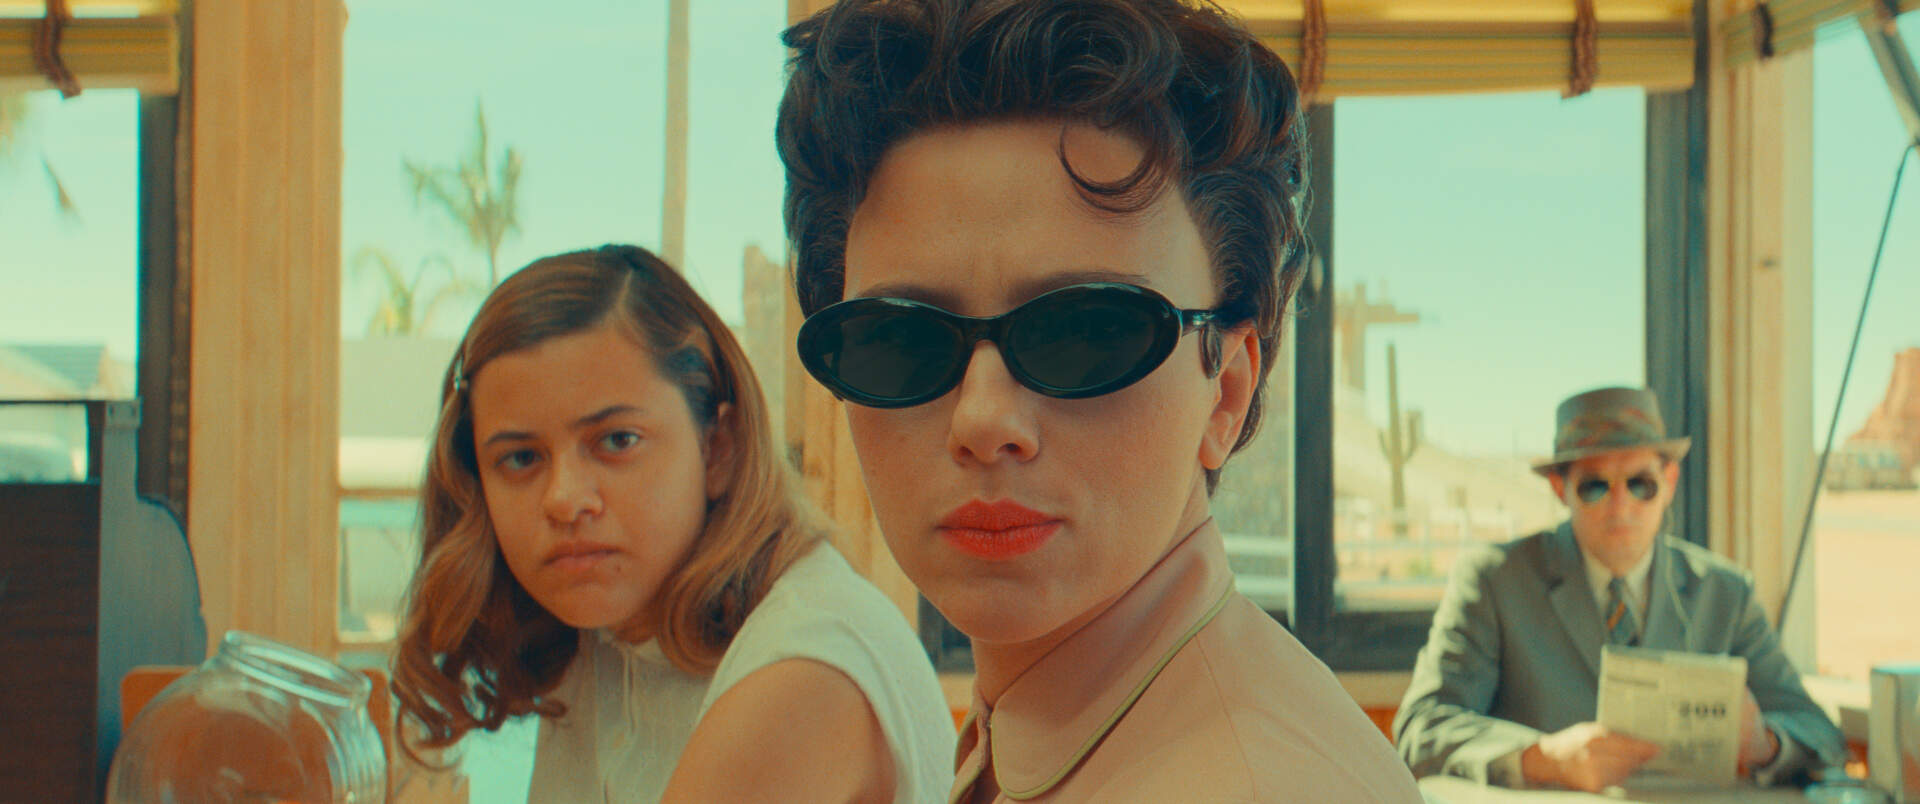 Left to right, Grace Edwards as Dinah, Scarlett Johansson as Midge Campbell and Damien Bonnaro as &quot;Bodyguard/Driver&quot; in writer-director Wes Anderson's &quot;Asteroid City.&quot; (Courtesy of Pop. 87 Productions/Focus Features)